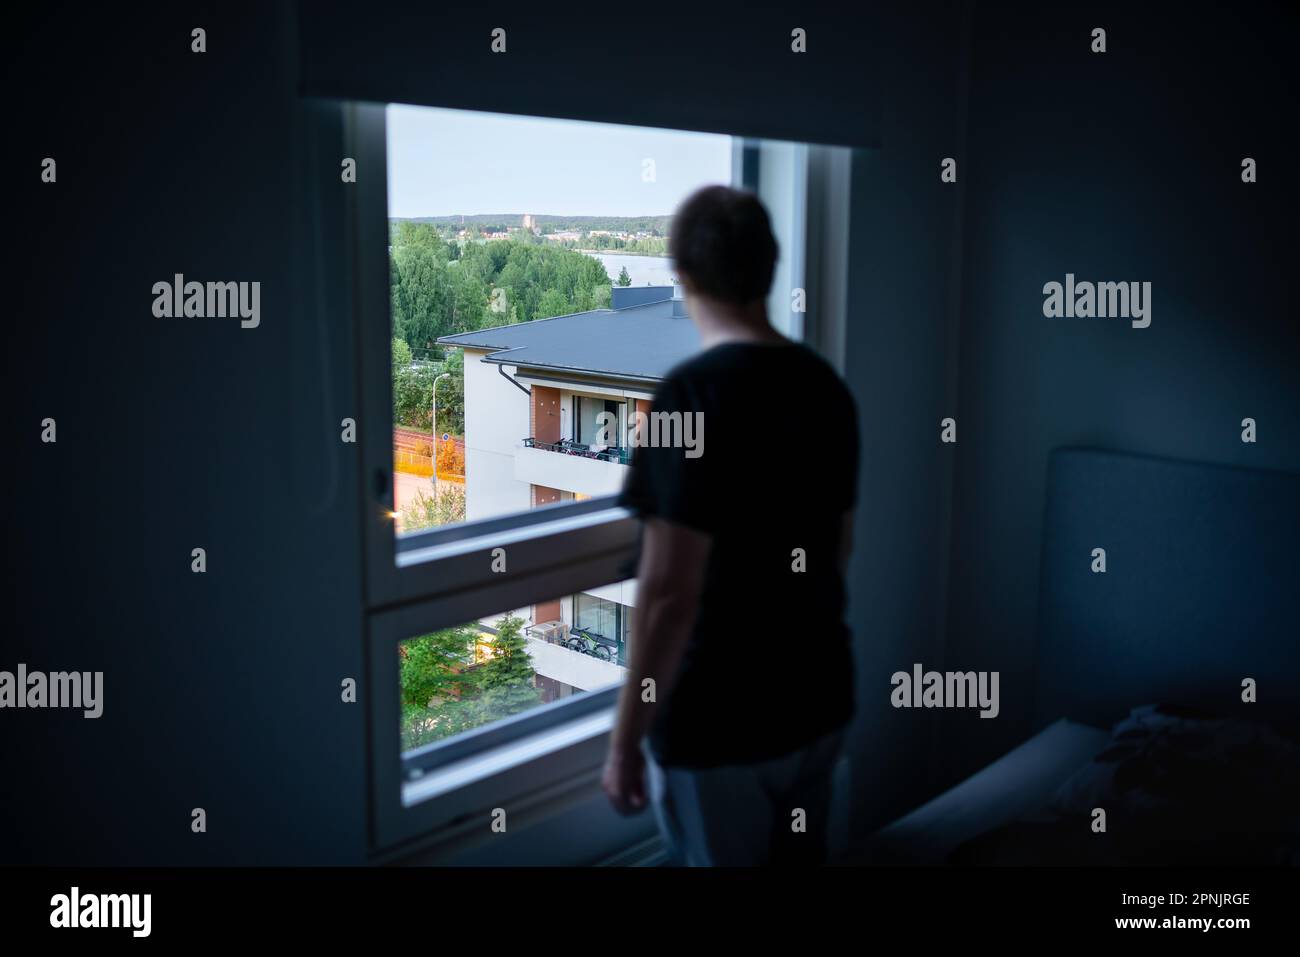 Man and window in dark room. Spying neighbor or snooping. Loneliness, shame or melancholy. Depressed, sad, moody or paranoid. Mental health. Stock Photo